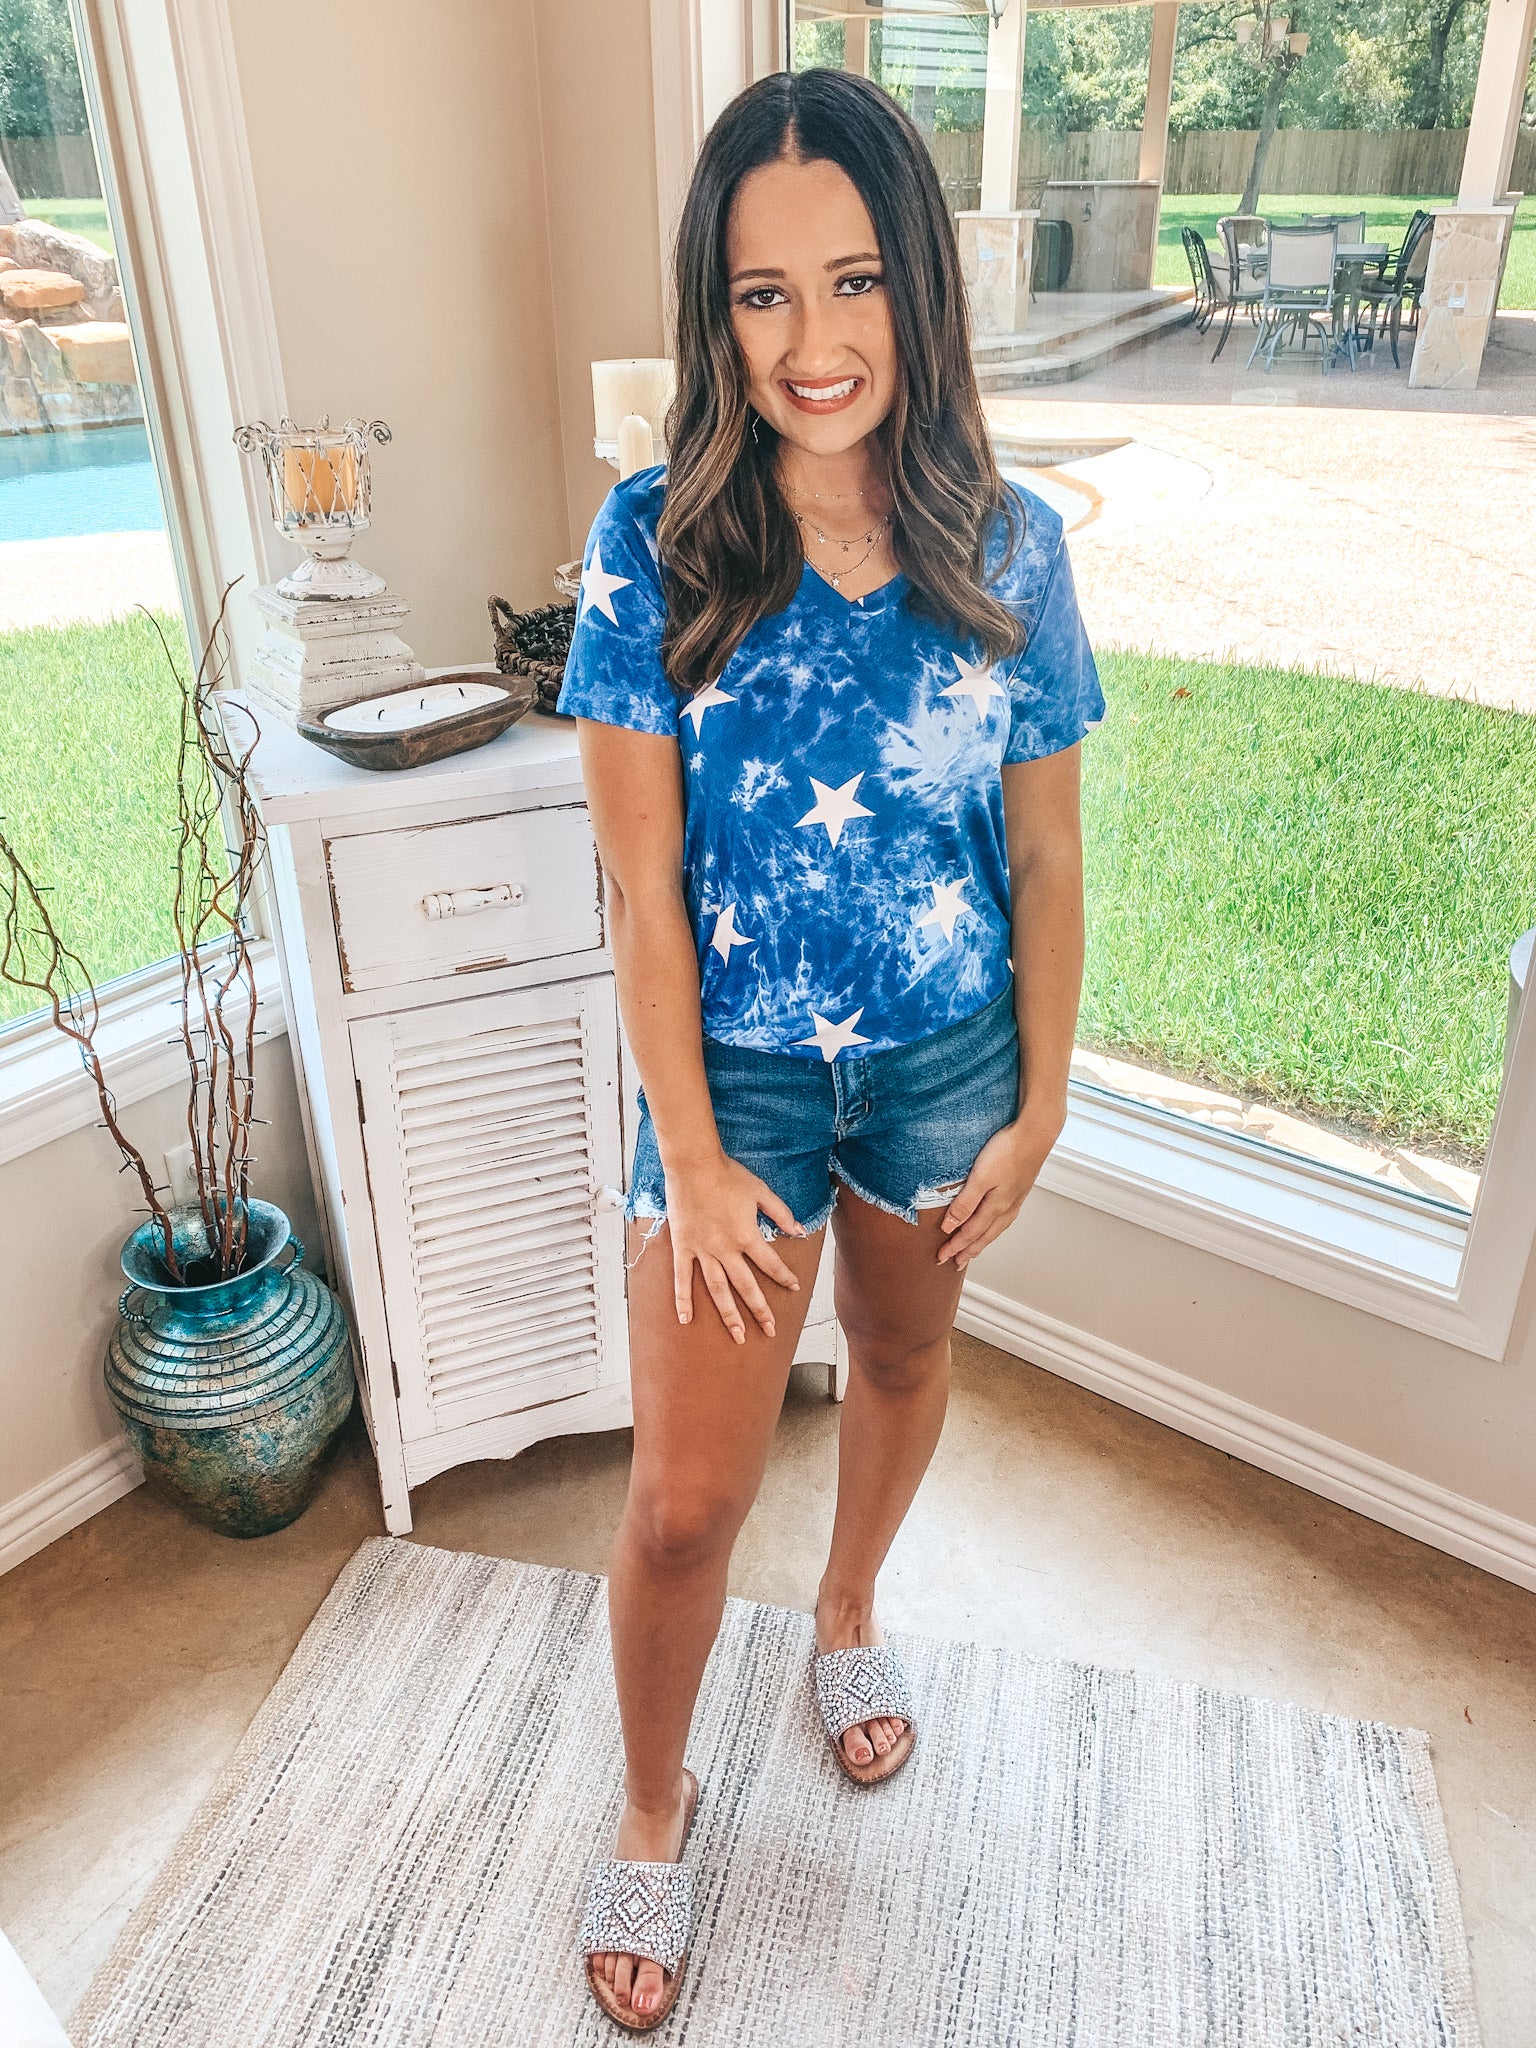 Stars in My Eyes Tie Dye V Neck Tee Shirt with Stars in Royal Blue - Giddy Up Glamour Boutique